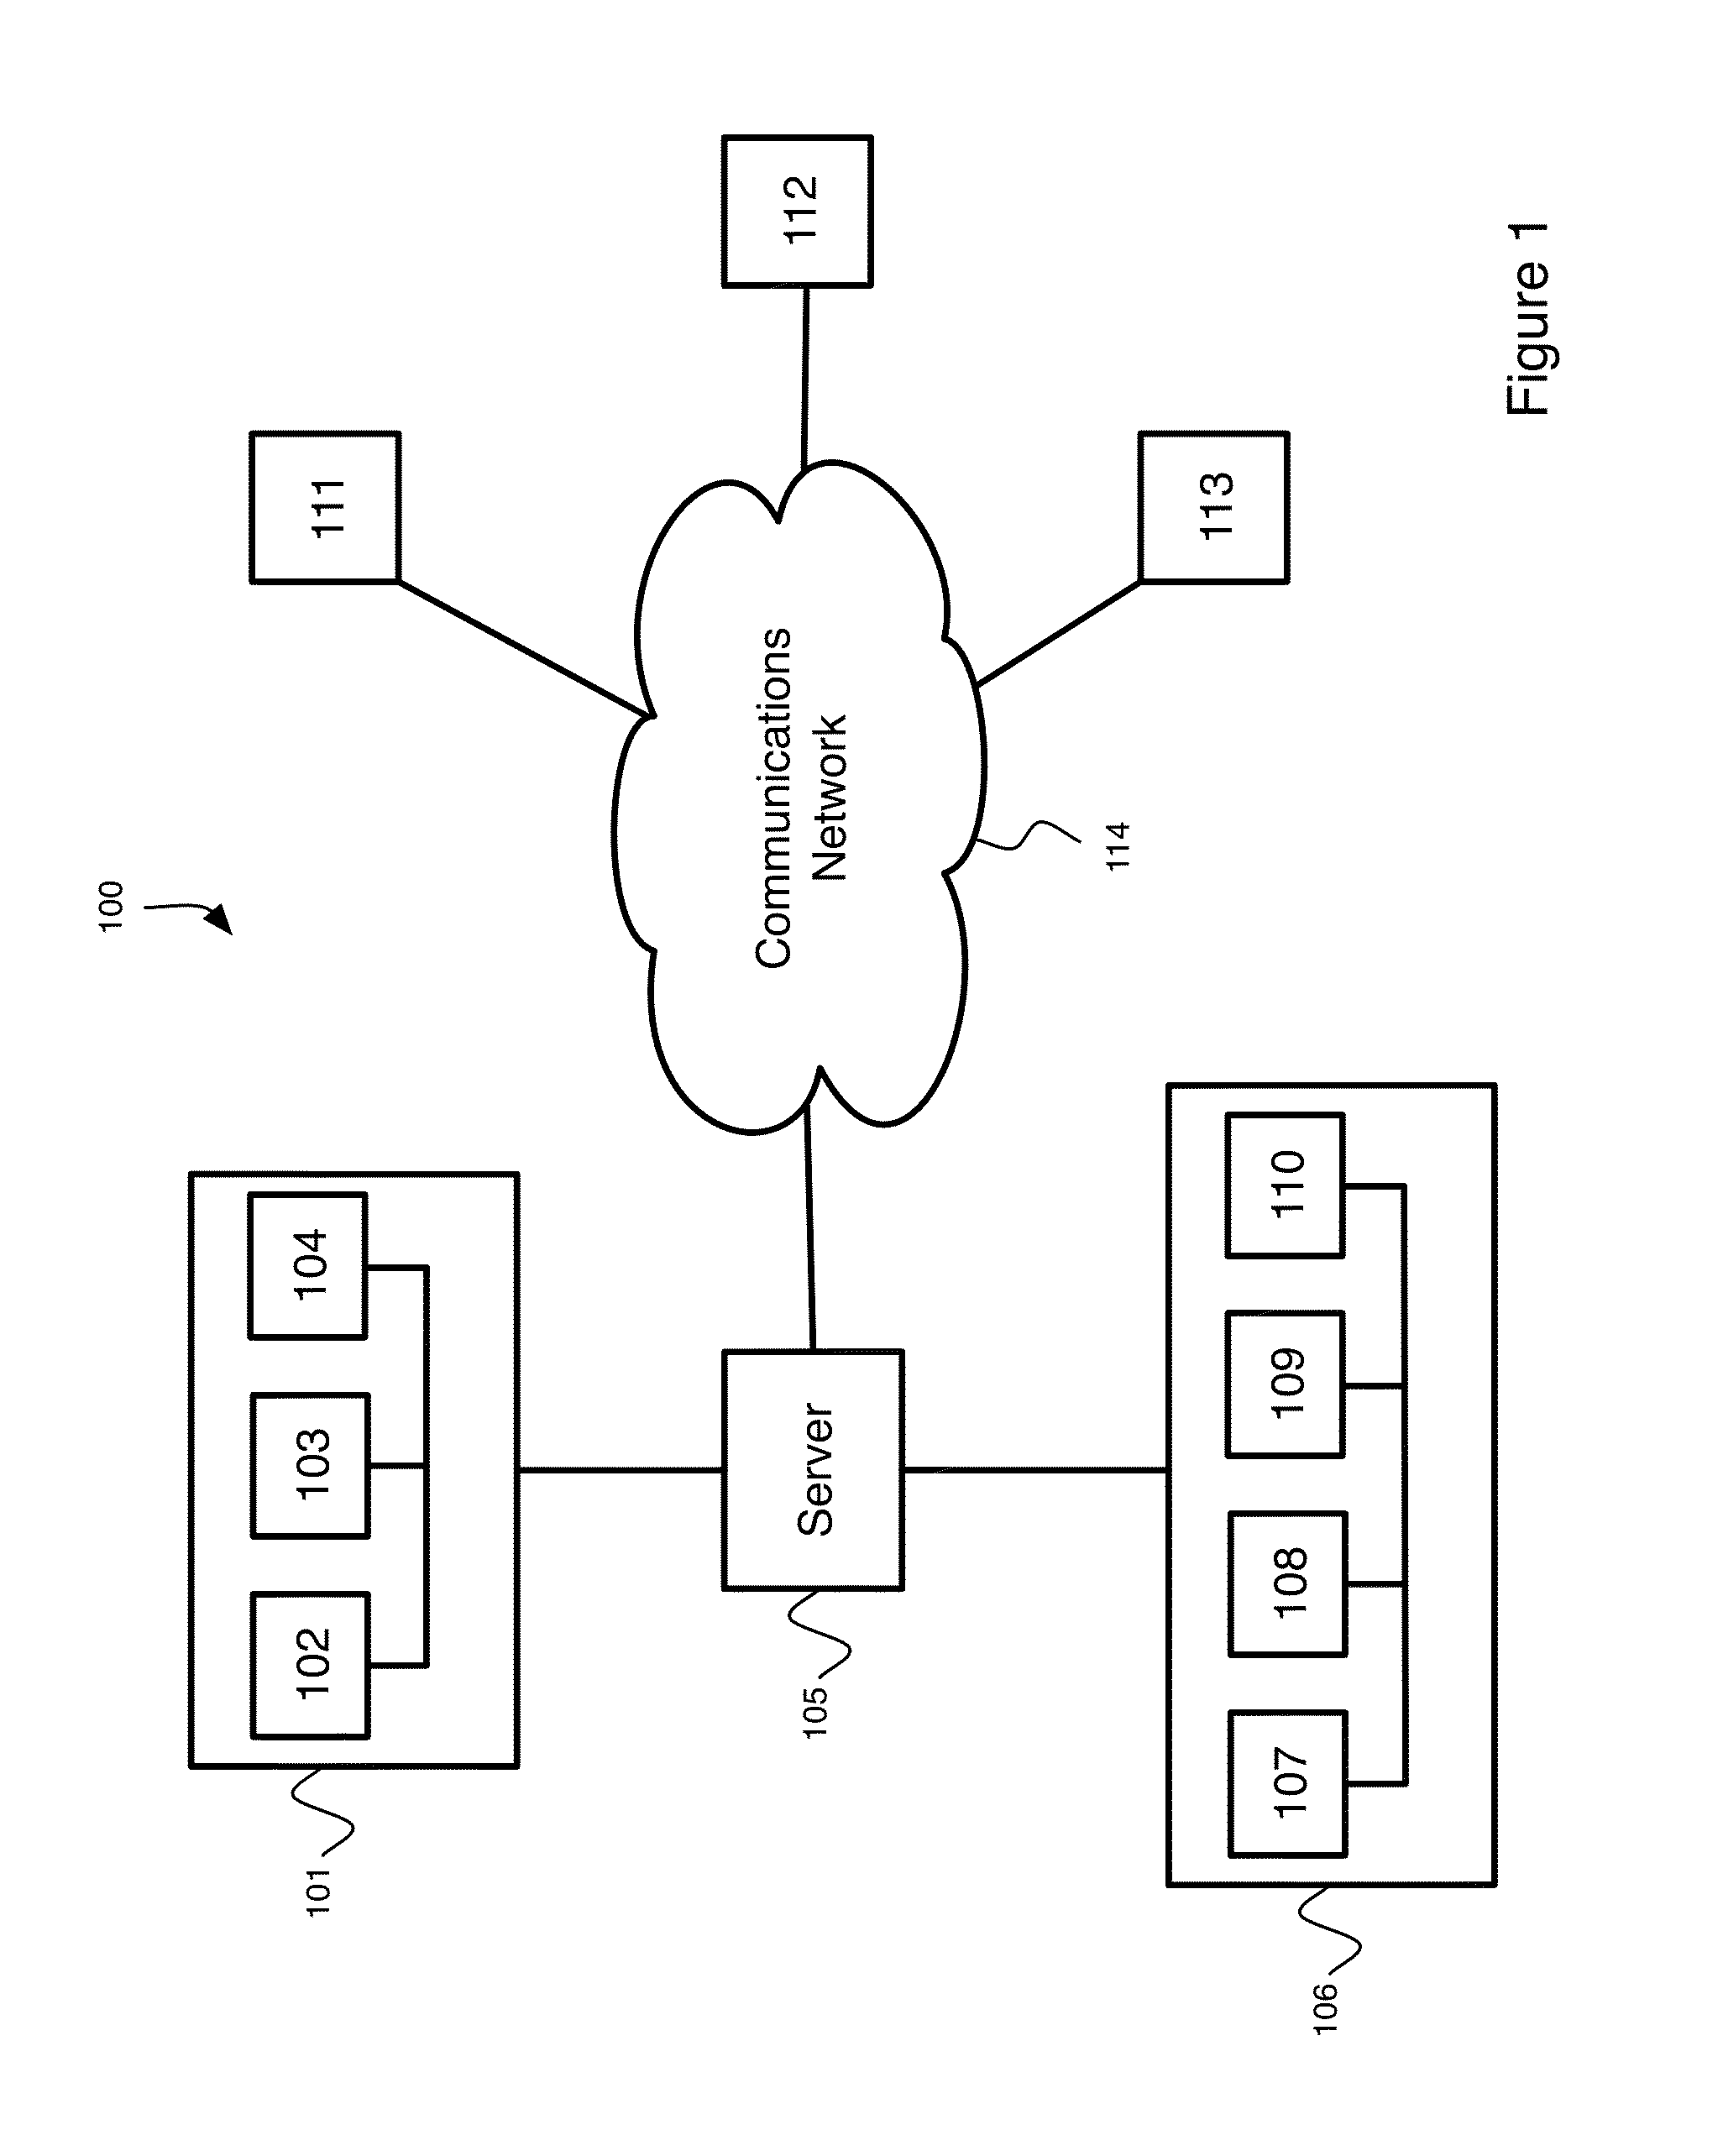 Method and system for modifying deployed applications